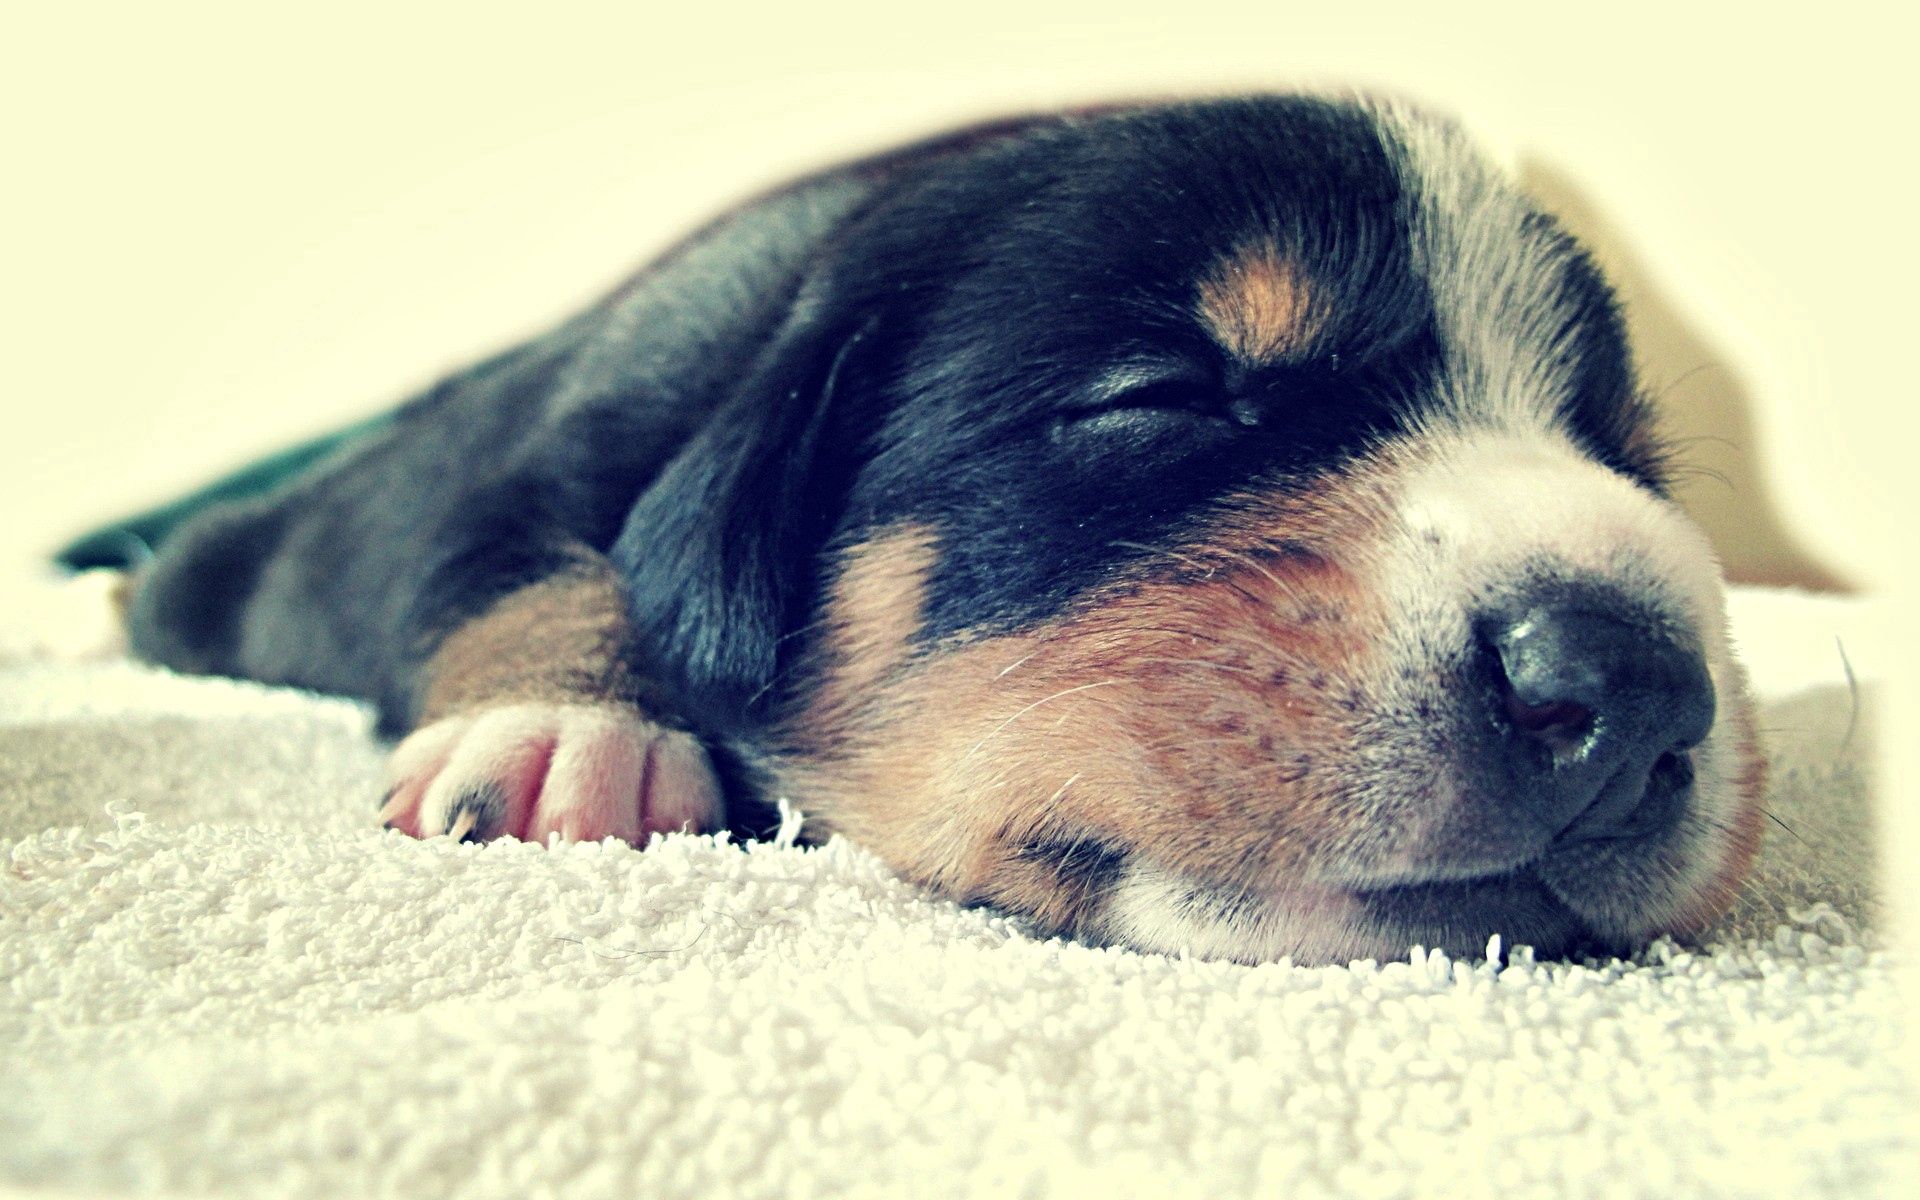 animals, muzzle, spotted, spotty, puppy, sleep, dream High Definition image